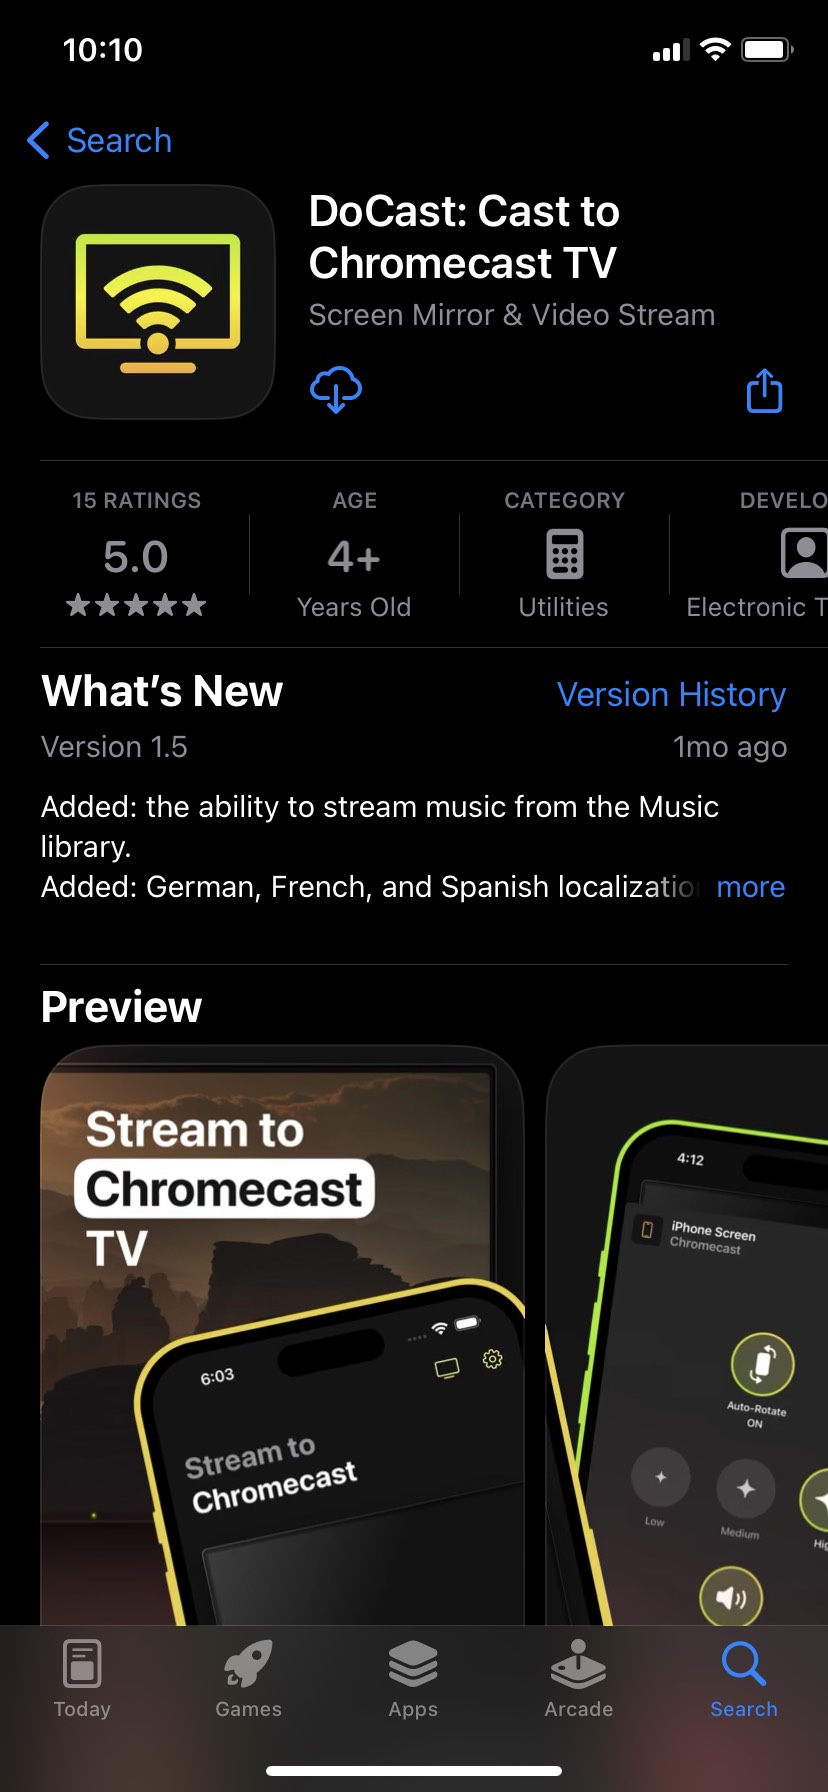 Download DoCast from the App Store